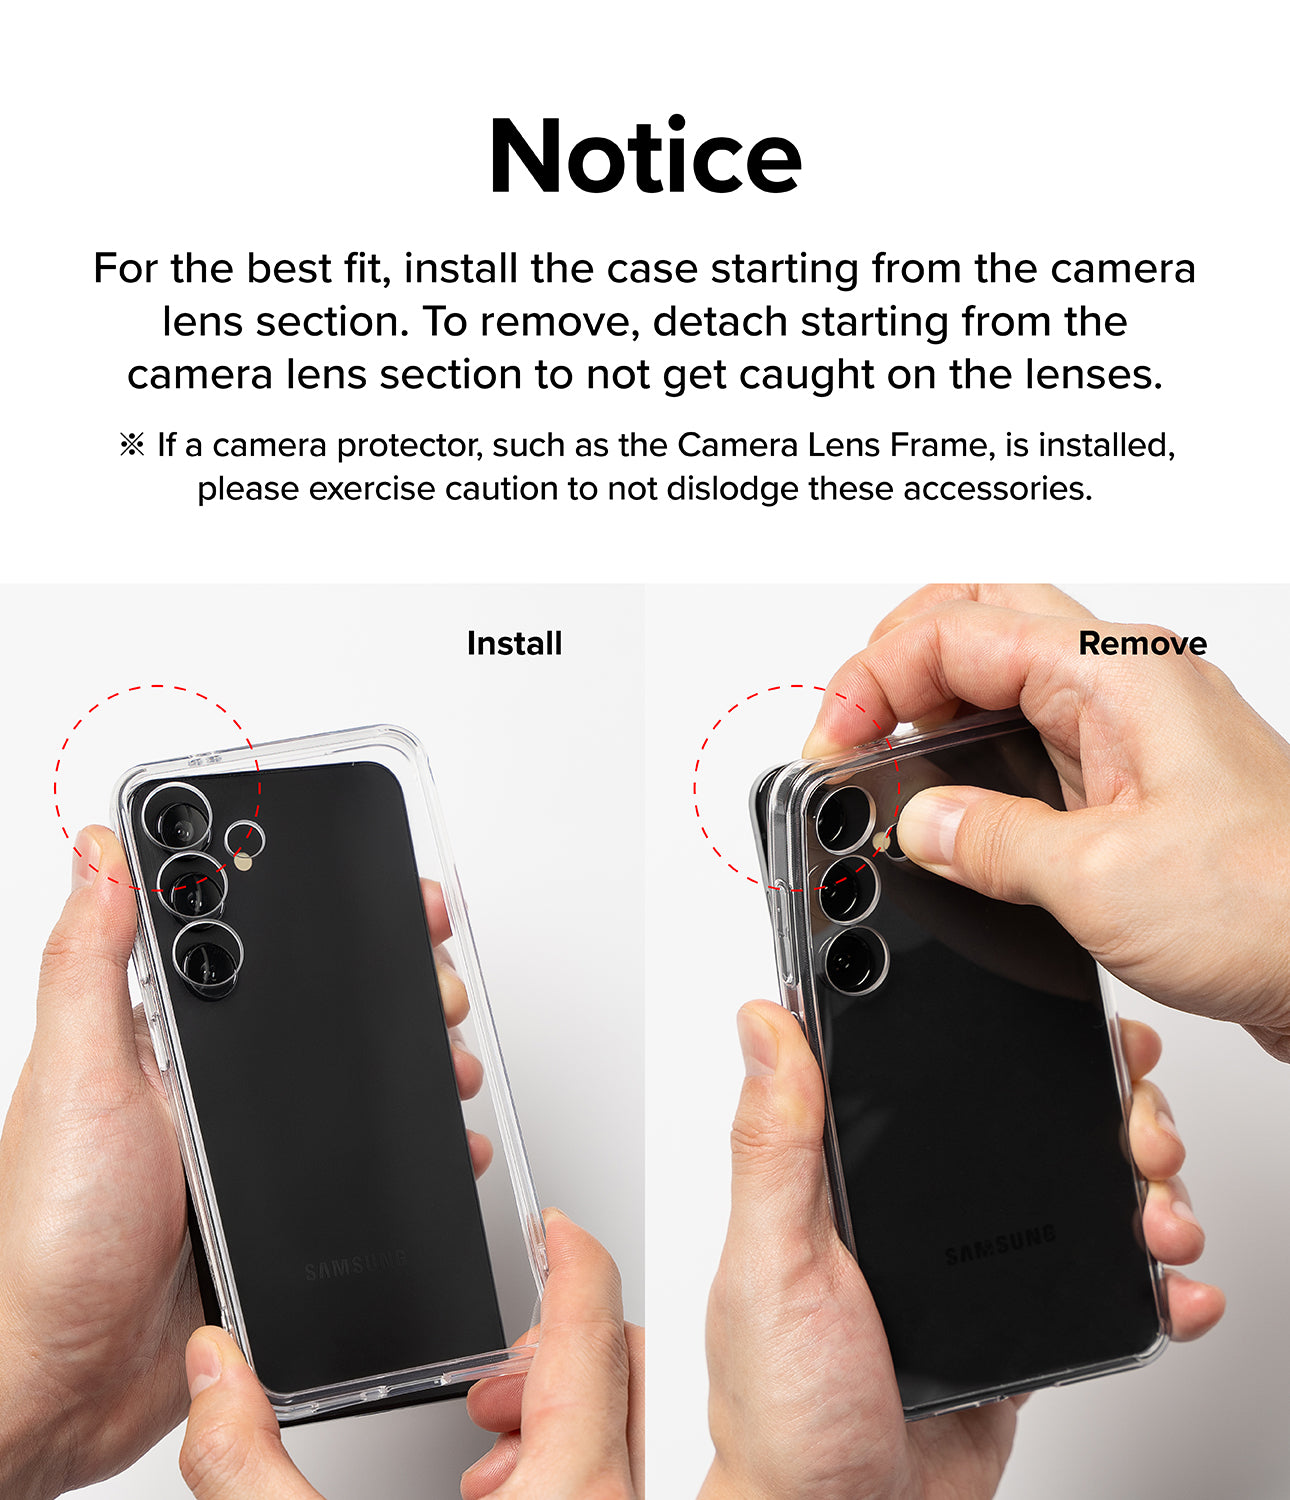 OnePlus 12R Case | Fusion-X Space Blue - Notice. For the best fit, install the case starting from the camera lens section. To remove, detach starting from the camera lens section to not get caught on the lenses.